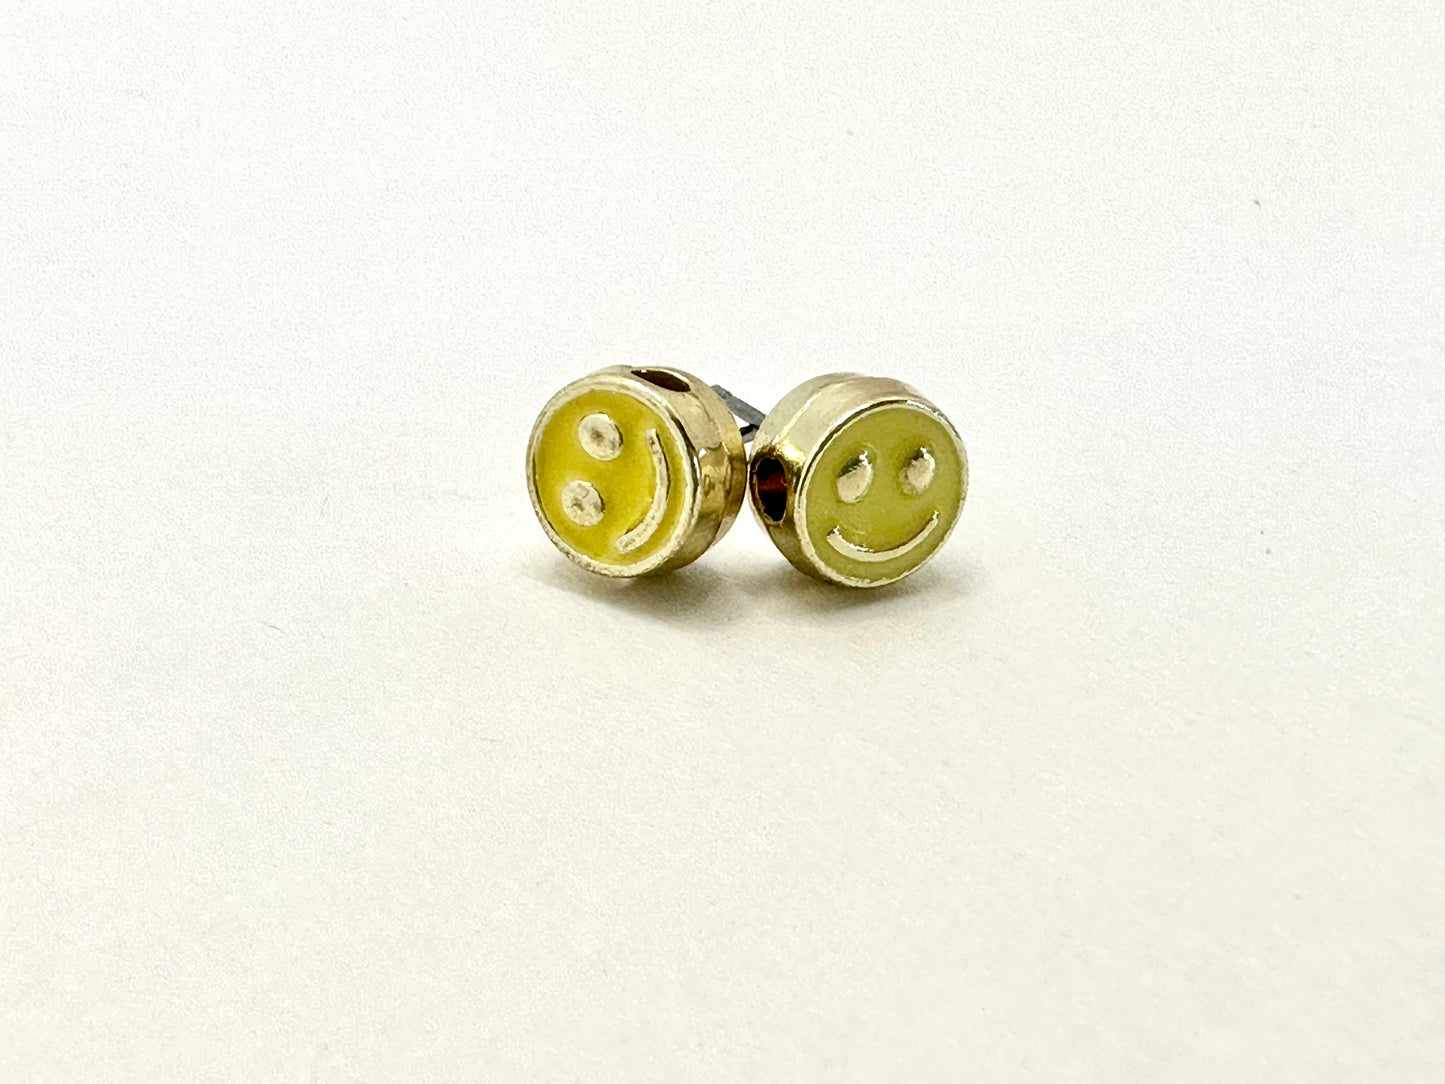 Yellow smiley face earrings